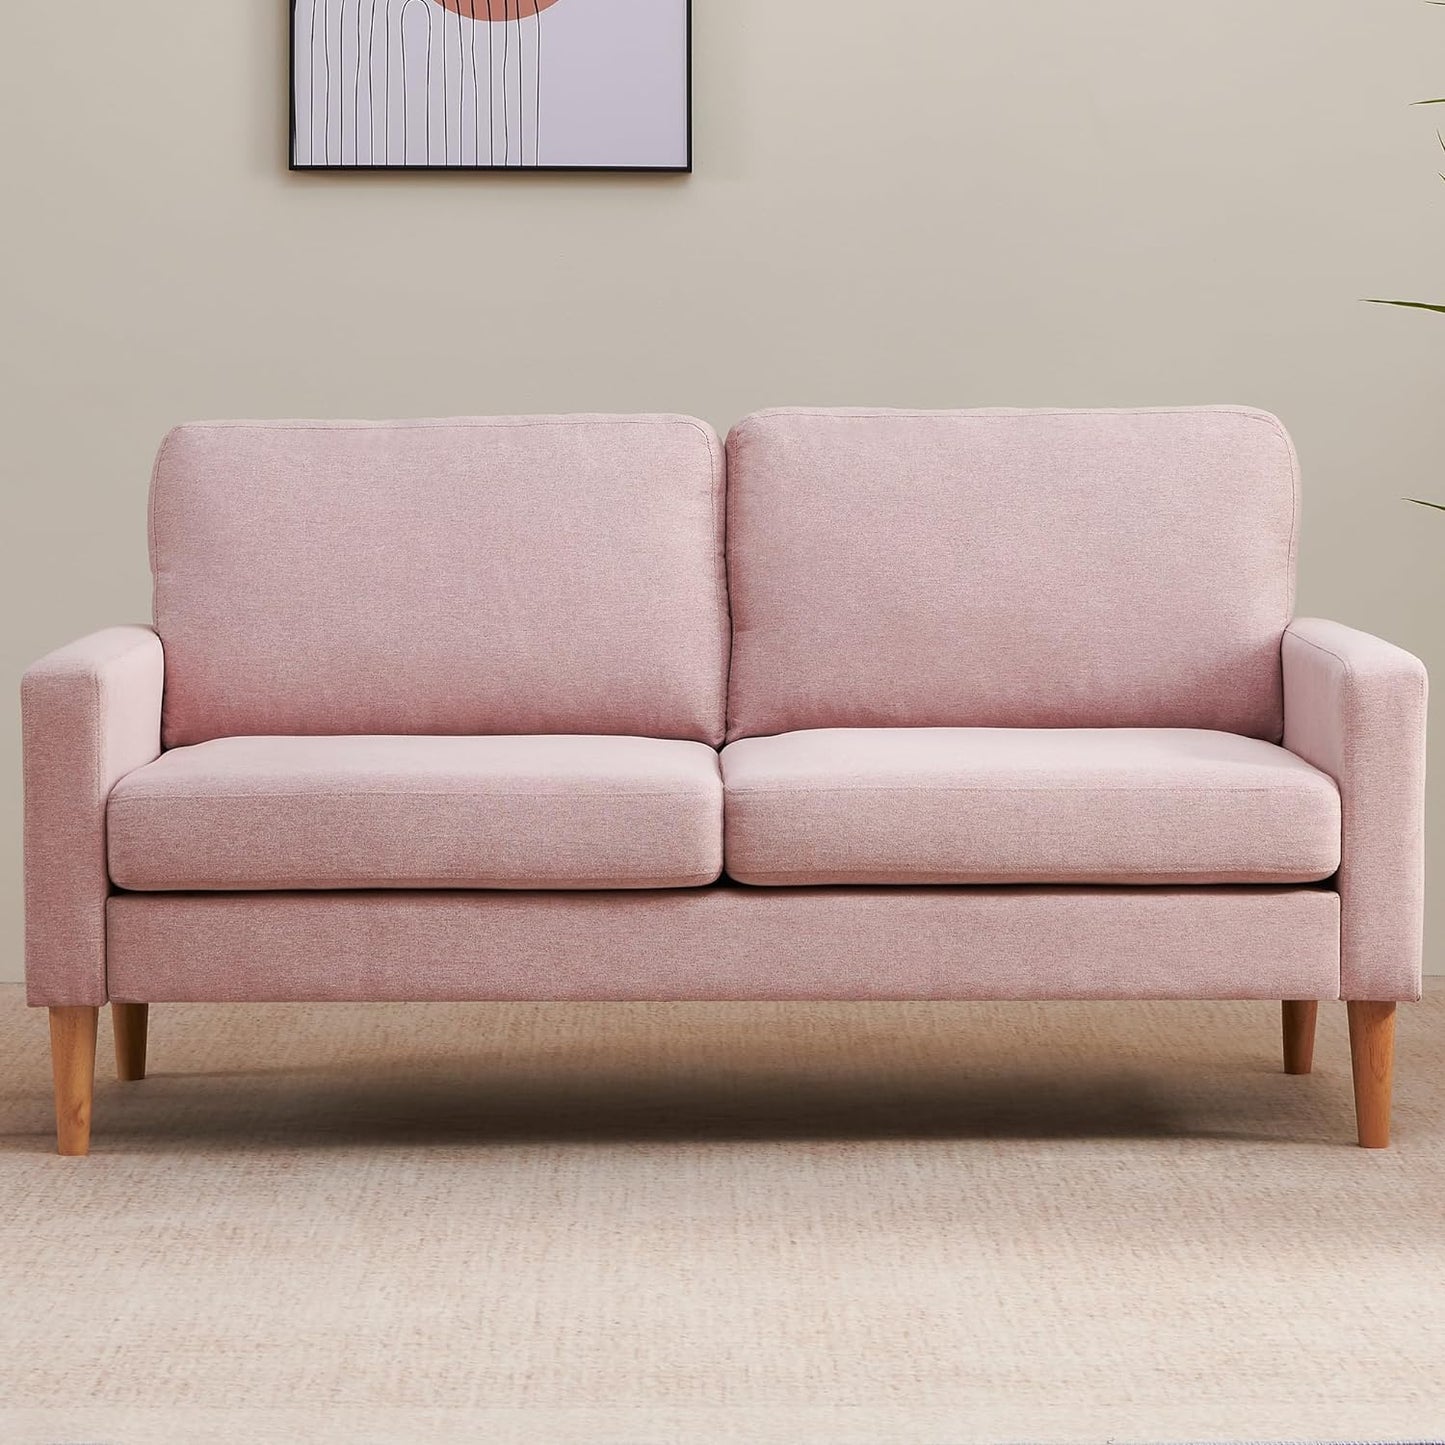 Couch for Small Spaces, 65 Inch Loveseat Sofa 2 Seat Couches for Bedroom, Spring Upholstered Small Sofa Couch with Solid Wood Frame, Tool Free Installation